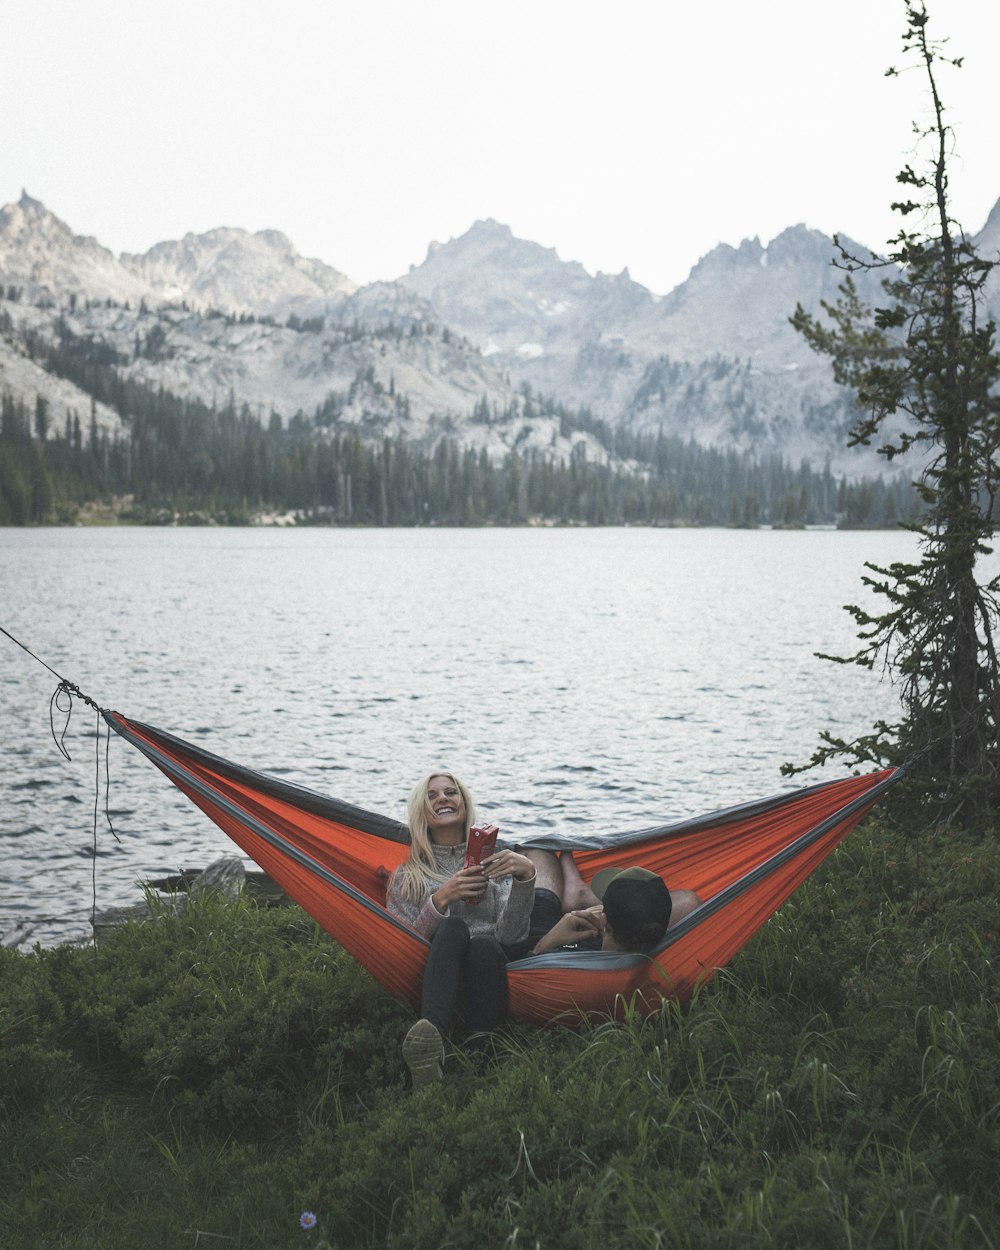 two person riding on hammock swing